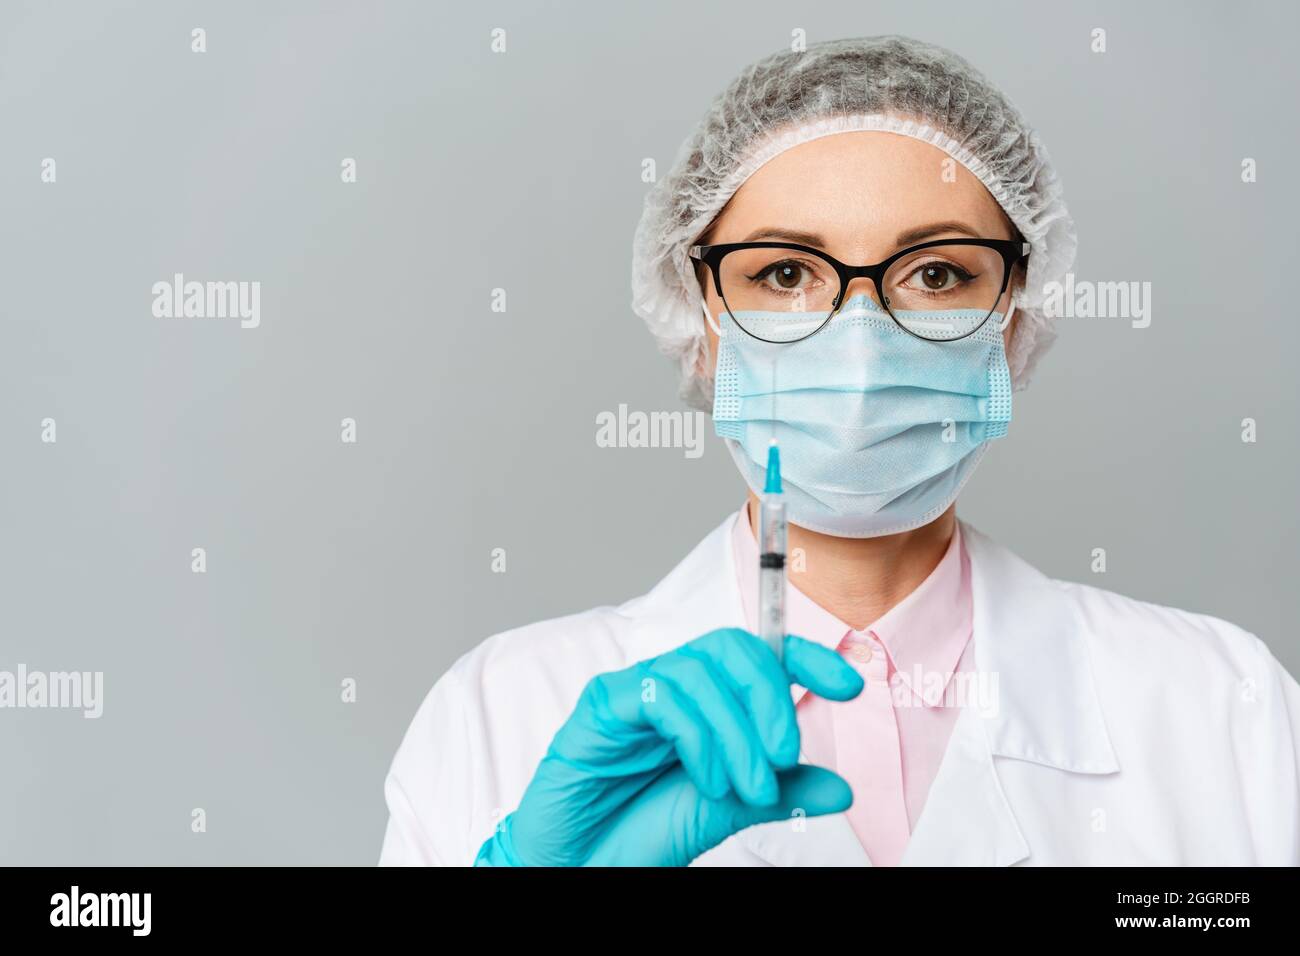 Female doctor or scientist in white medical gown, blue gloves, green cap and mask holds a syringe in hands on white background. She is ready to give Stock Photo